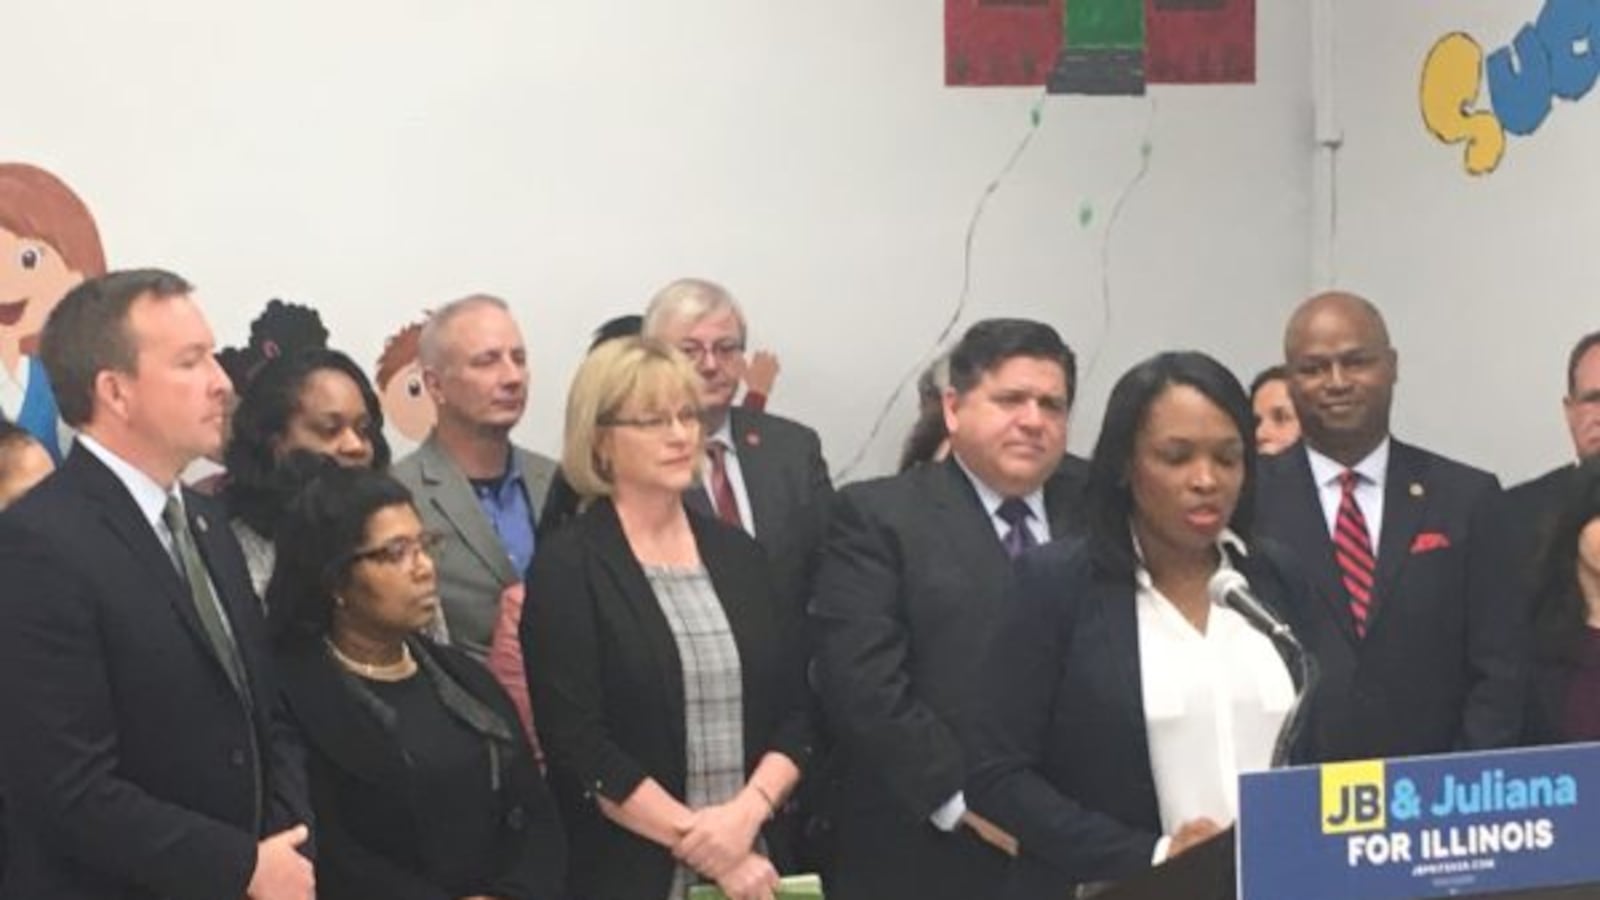 In November, Jackson was chosen to co-chair an advisory group formed by Governor-elect J.B. Pritzker to build and support his education agenda over the next four years.